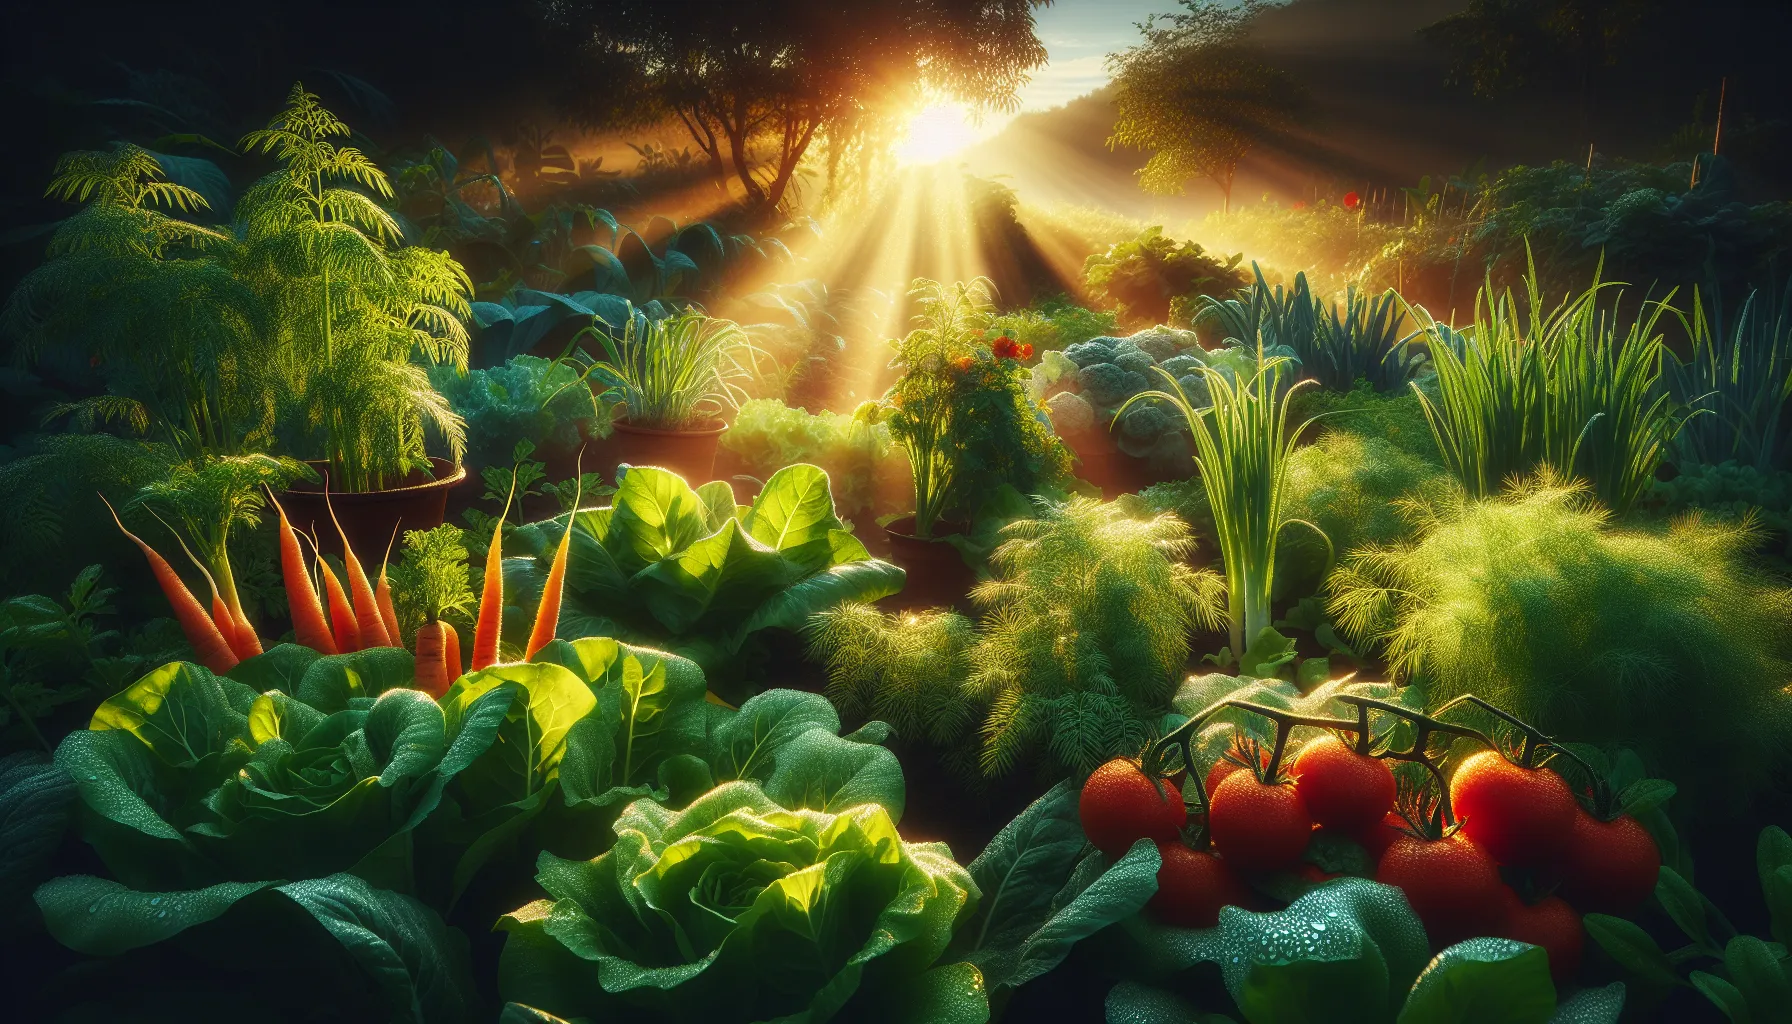 Sunrays illuminate a lush veggie garden with carrots, tomatoes, and leafy greens thriving in the early morning light.